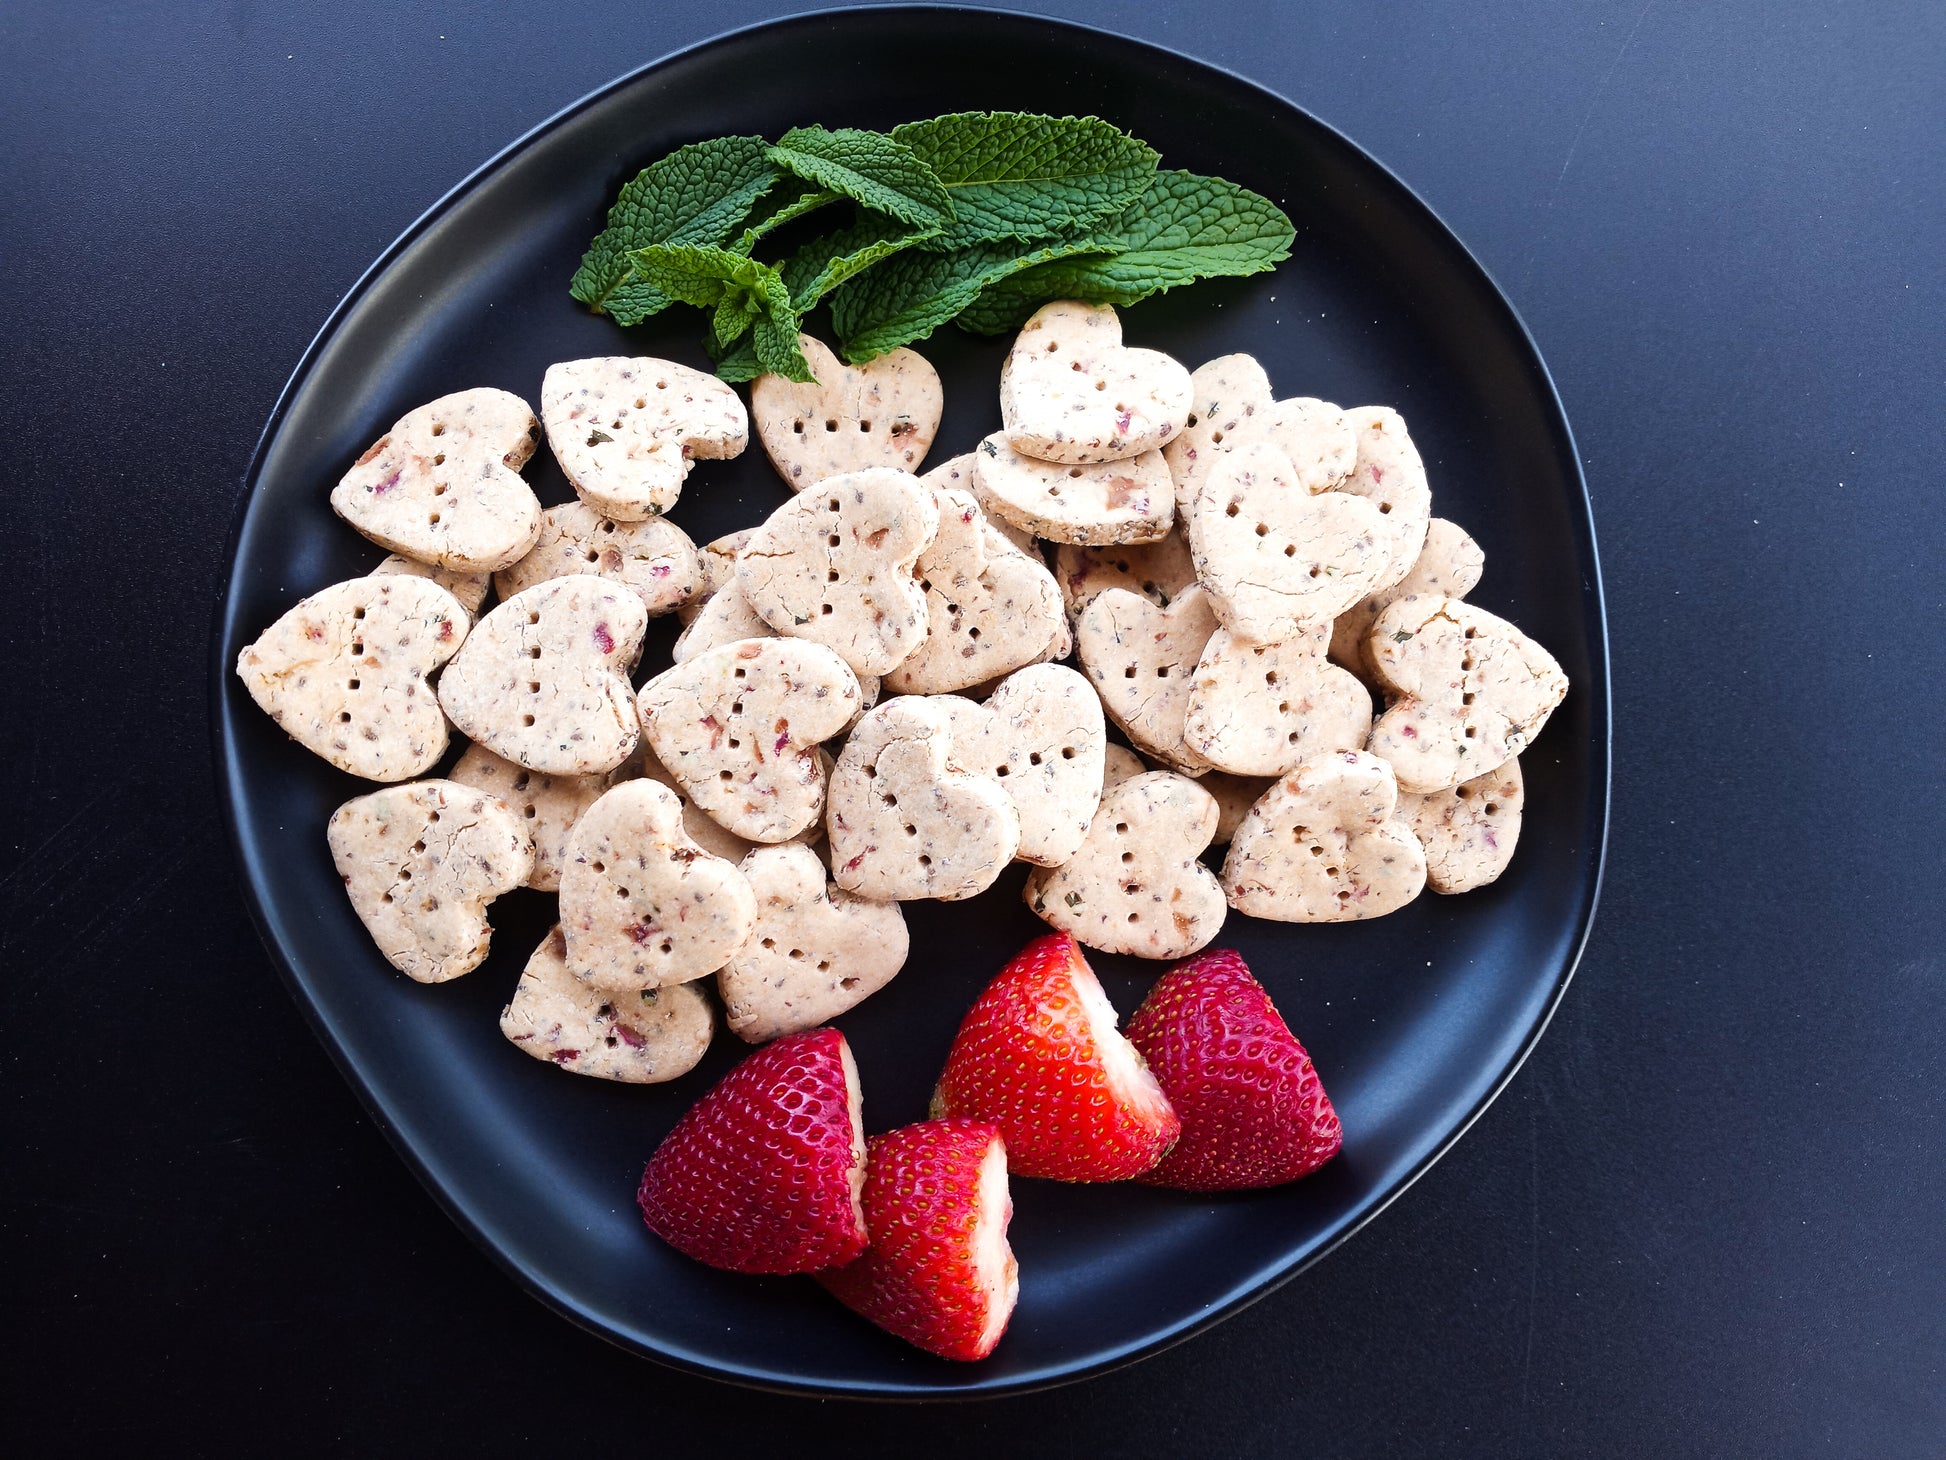 Strawberry Mint Biscuits